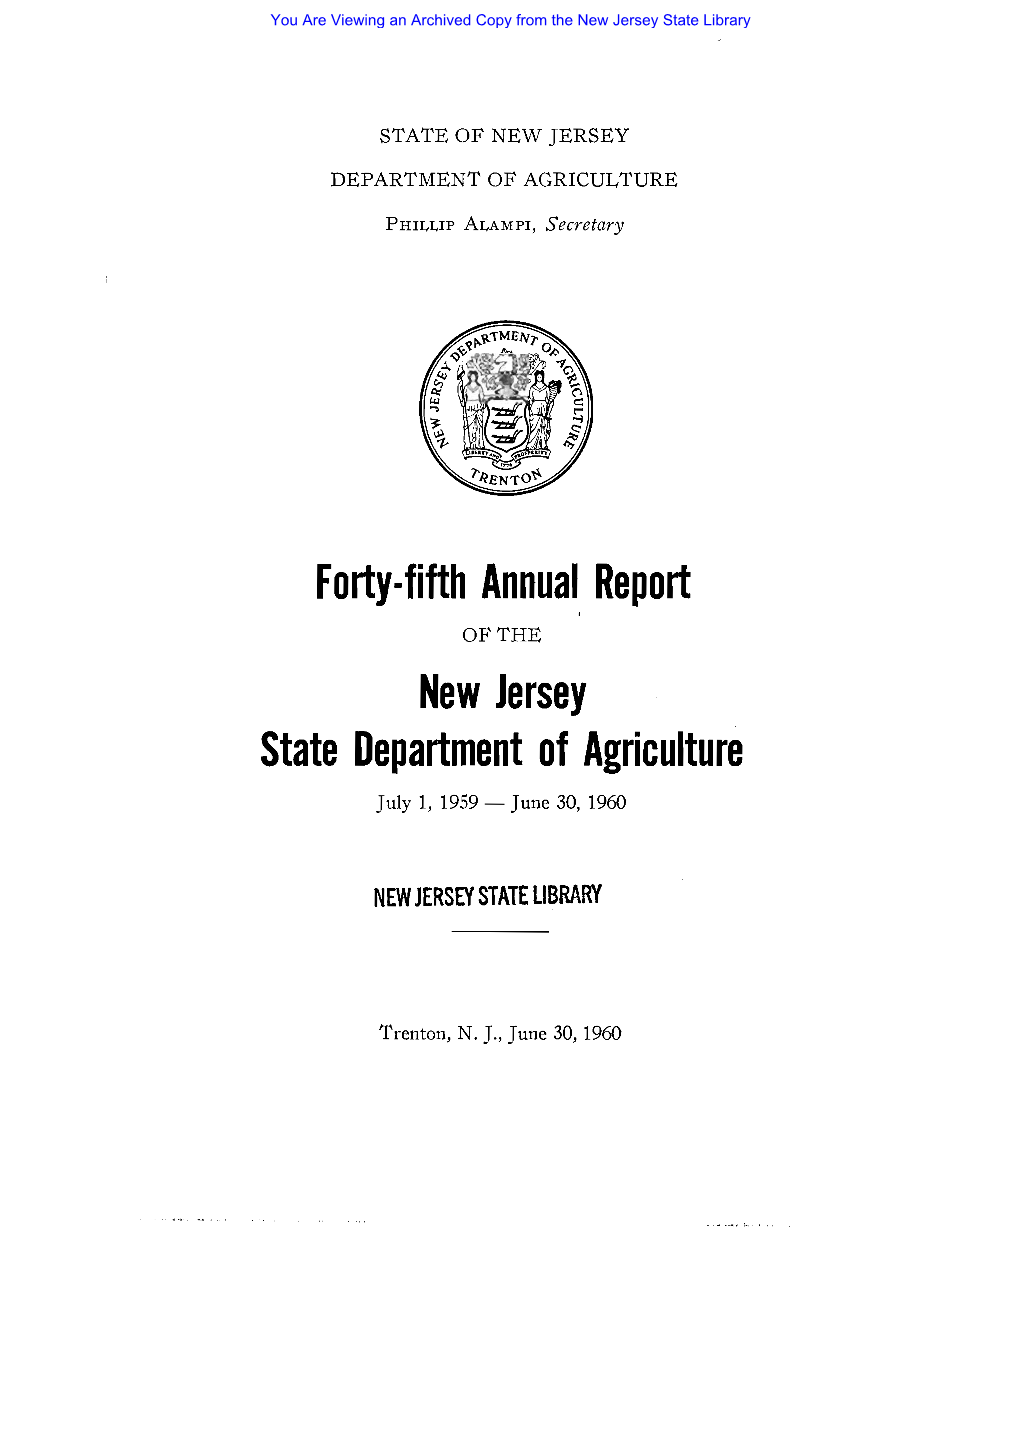 Forty-Fifth Annual Report New Jersey State Department of Agriculture